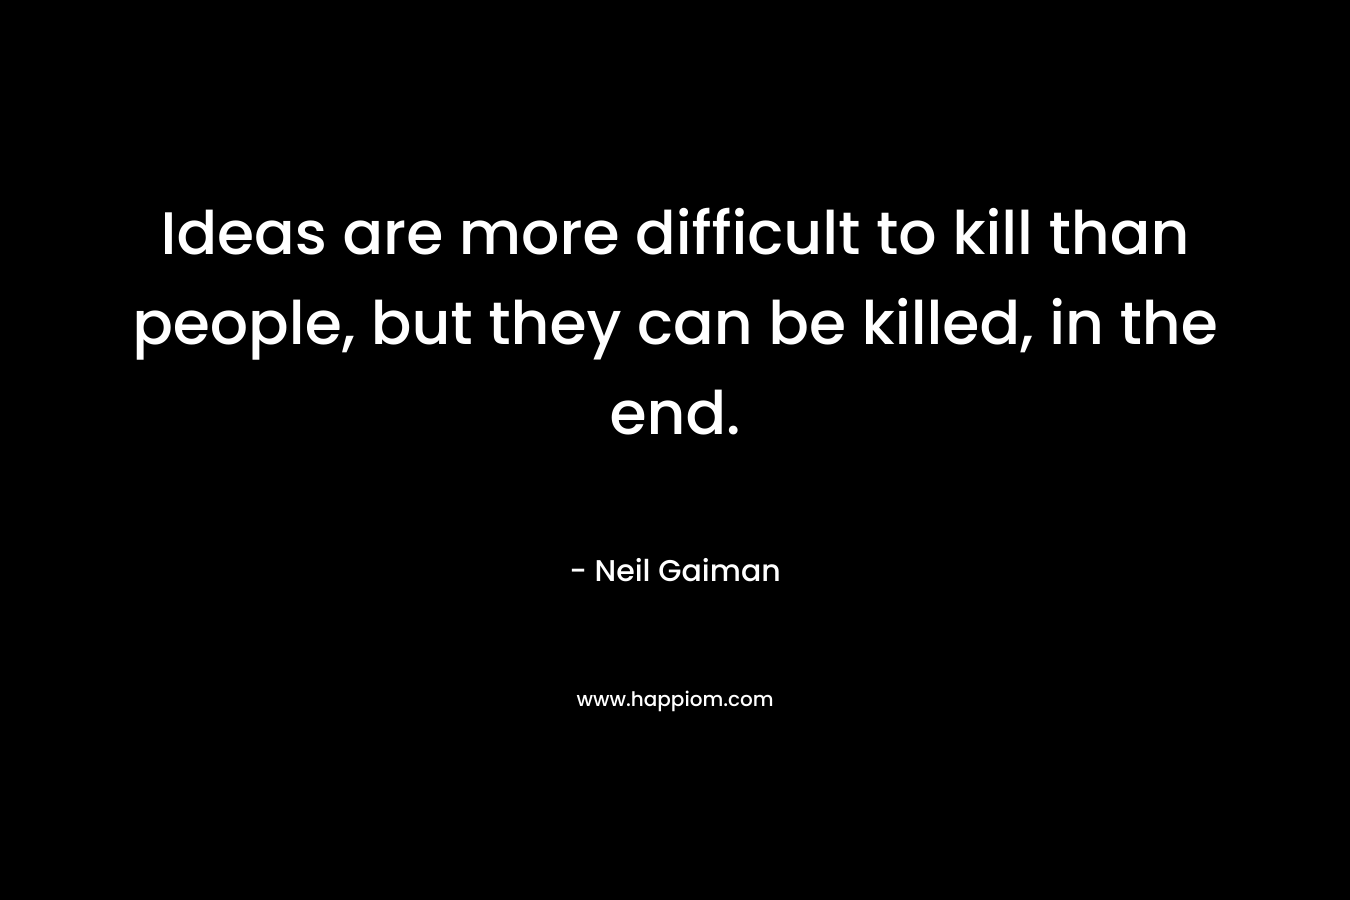 Ideas are more difficult to kill than people, but they can be killed, in the end.